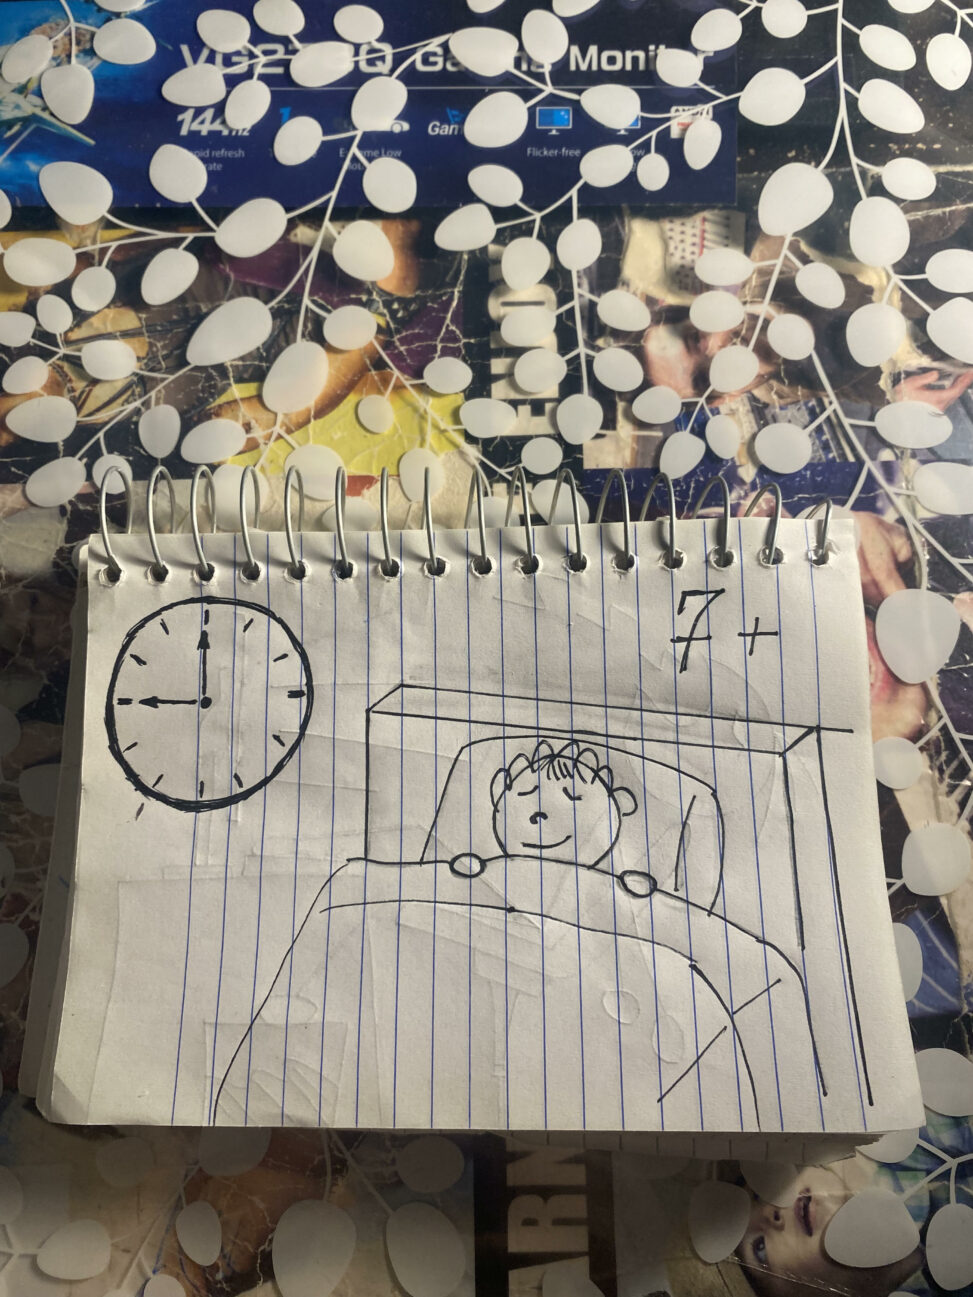 I have a picture of a stick figure sleeping in his bed happy with a clock on the top right corner on 9 and on the top left corner having a number with 7+ meaning I would be sleeping for more than 7 hours everyday for